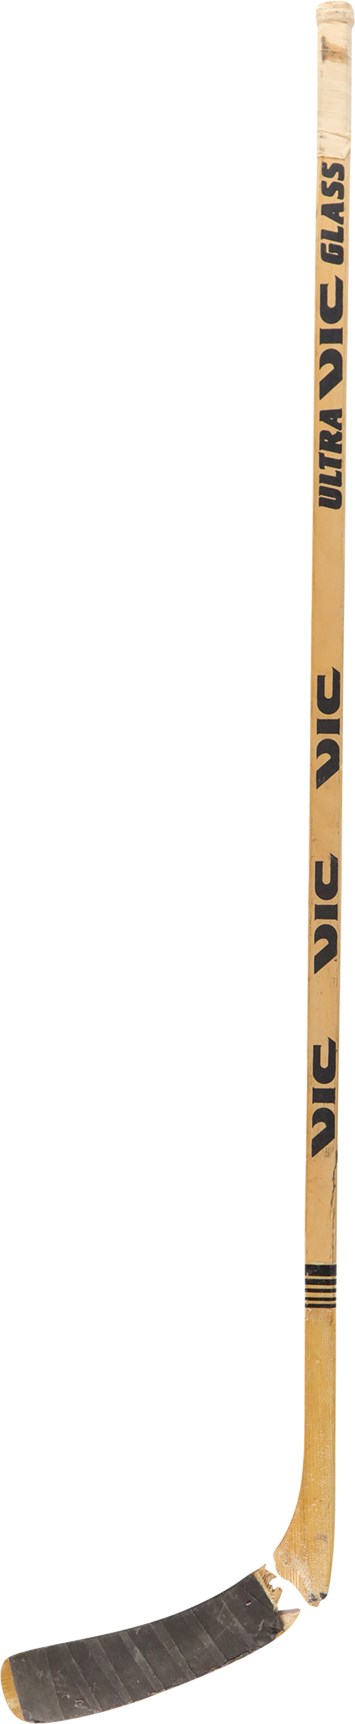 - Early Phil Housley Game Used Hockey Stick